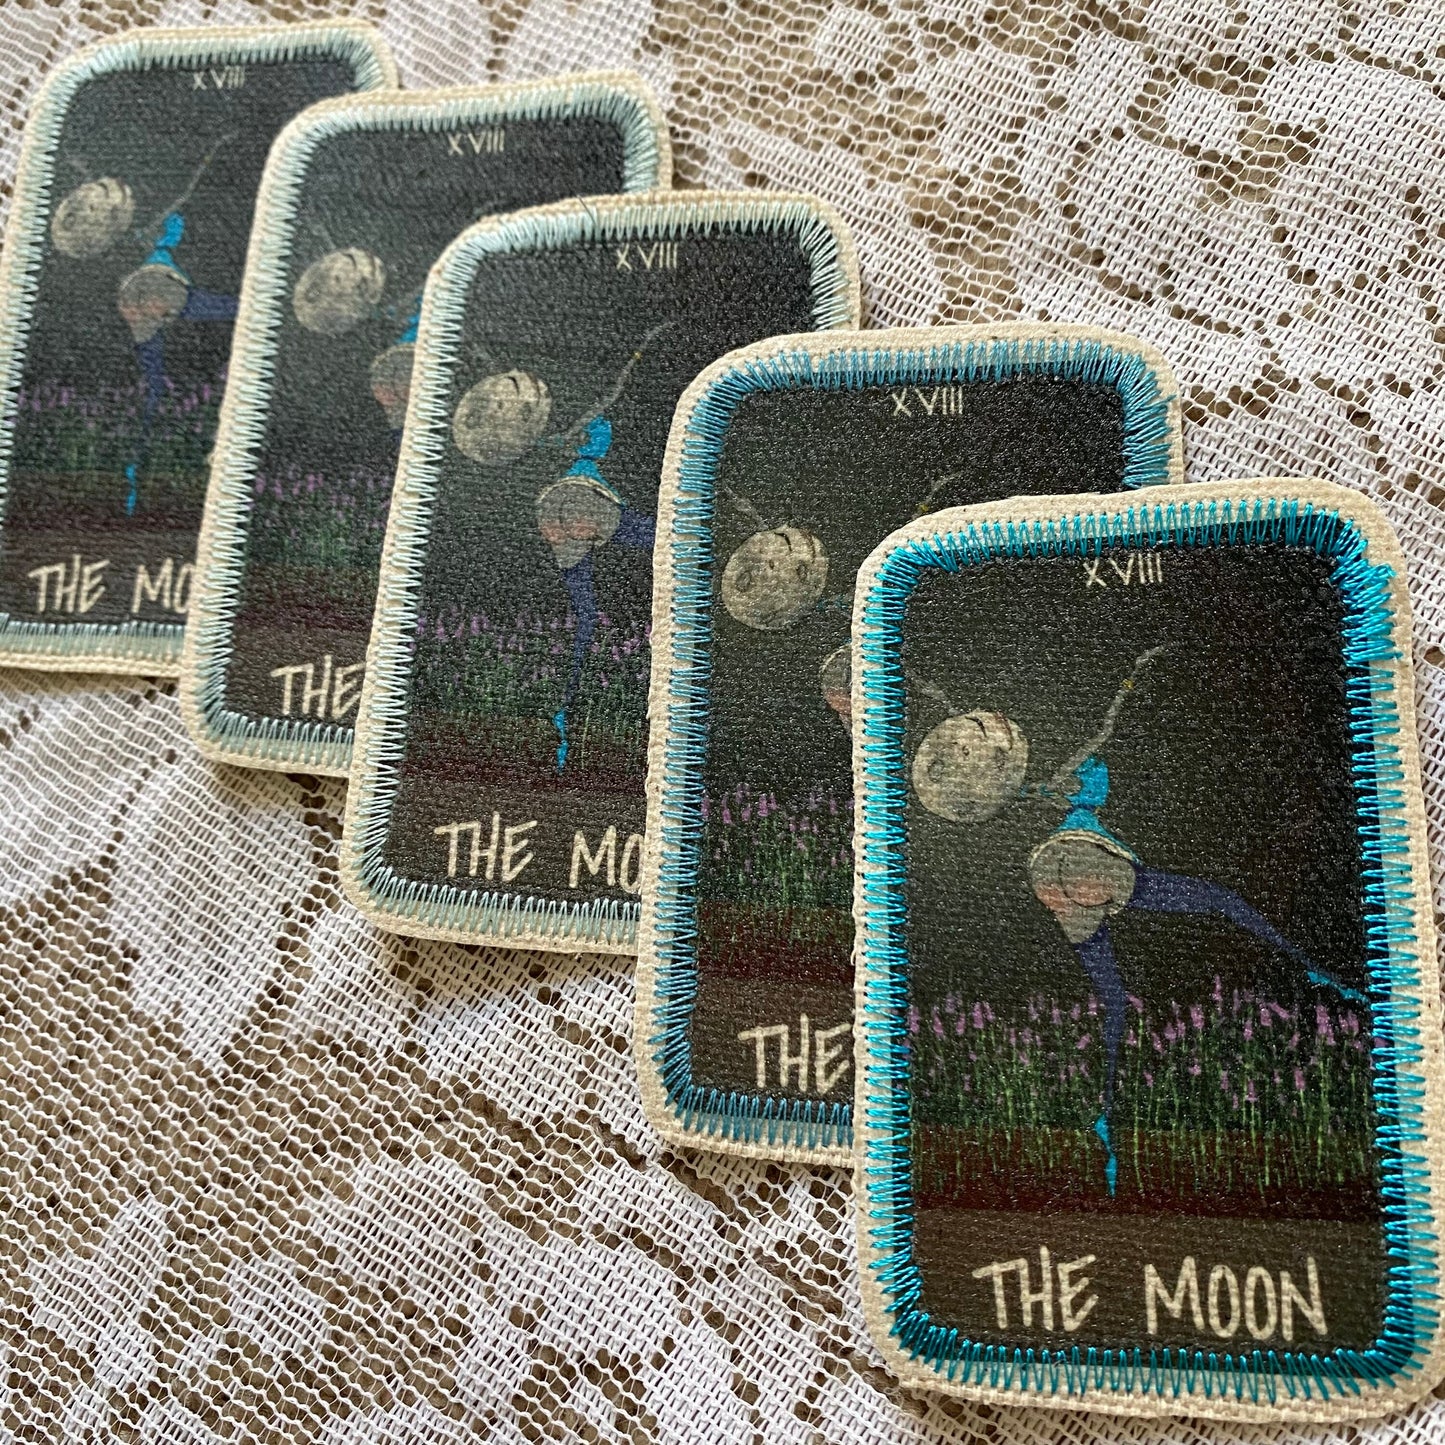 The Moon Canvas Patch